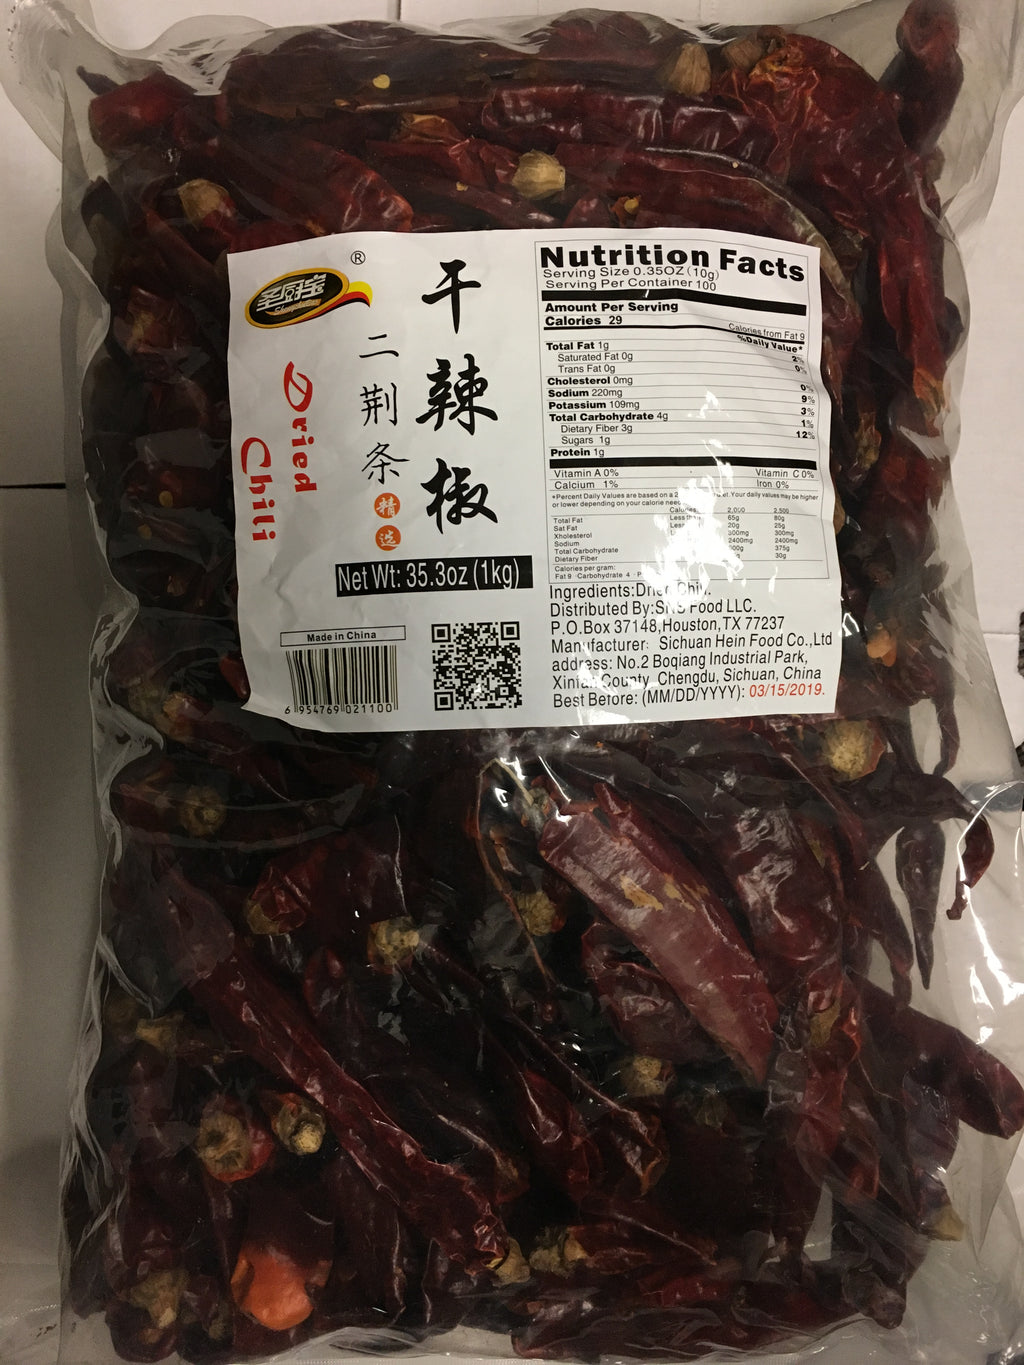 Spicy Element Sichuan Dried Red Chili Pepper - Er Jing Tiao 35.3 oz for Sichuan Cuisine and Hot Pot (1kg)